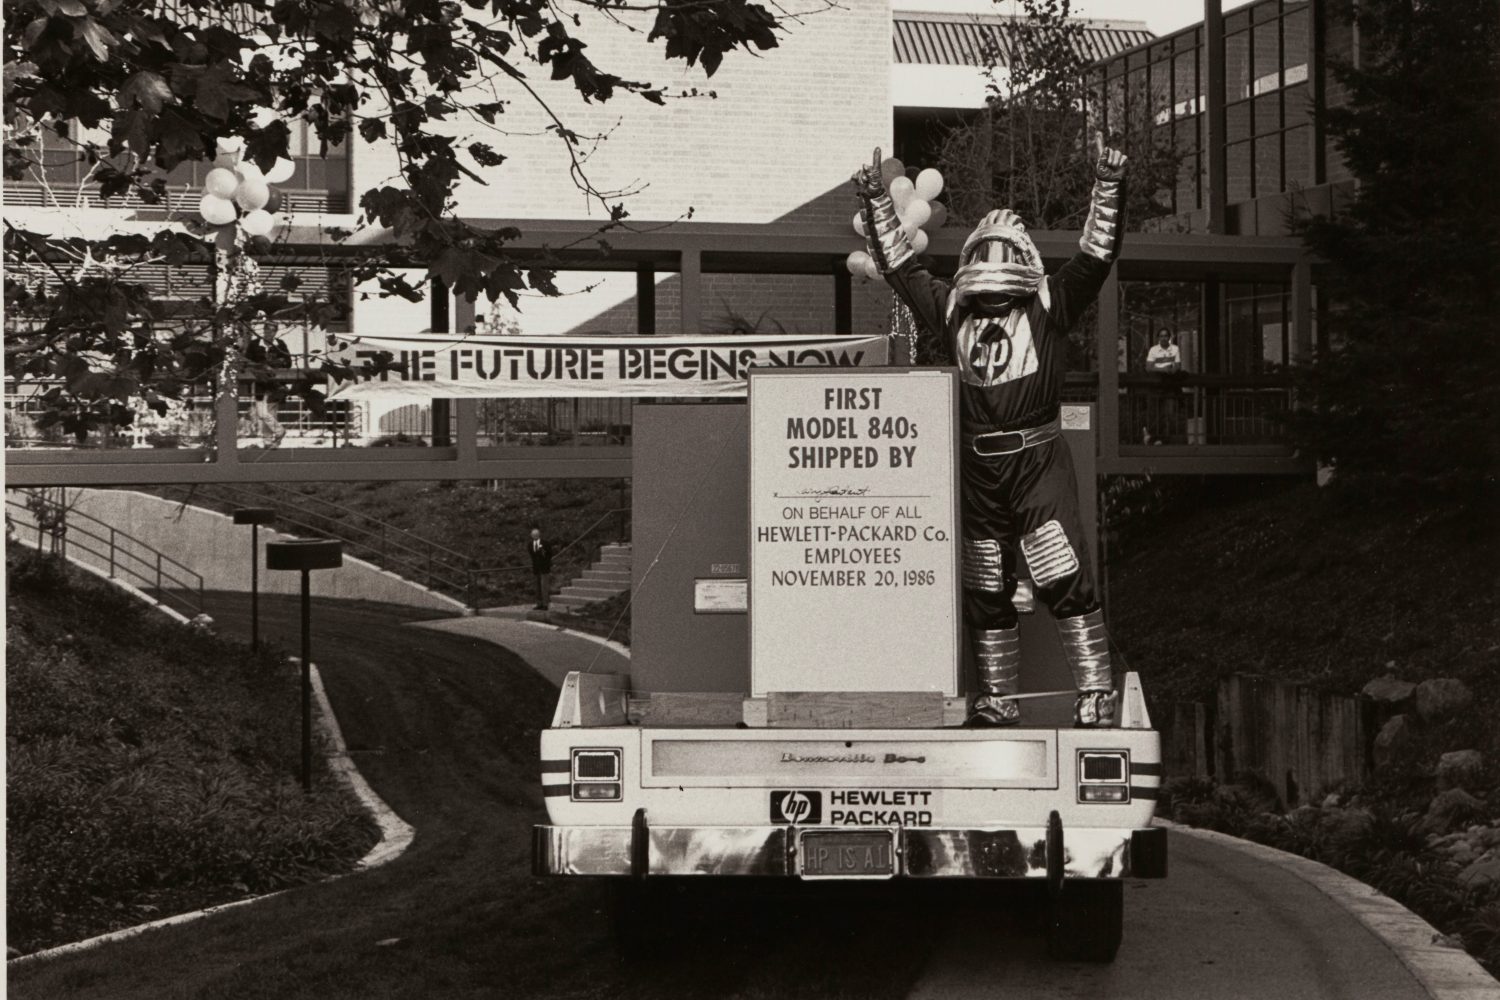 An HP employee in a futuristic costume celebrating the shipment of HP's first Precision Architecture products (Model 840s).